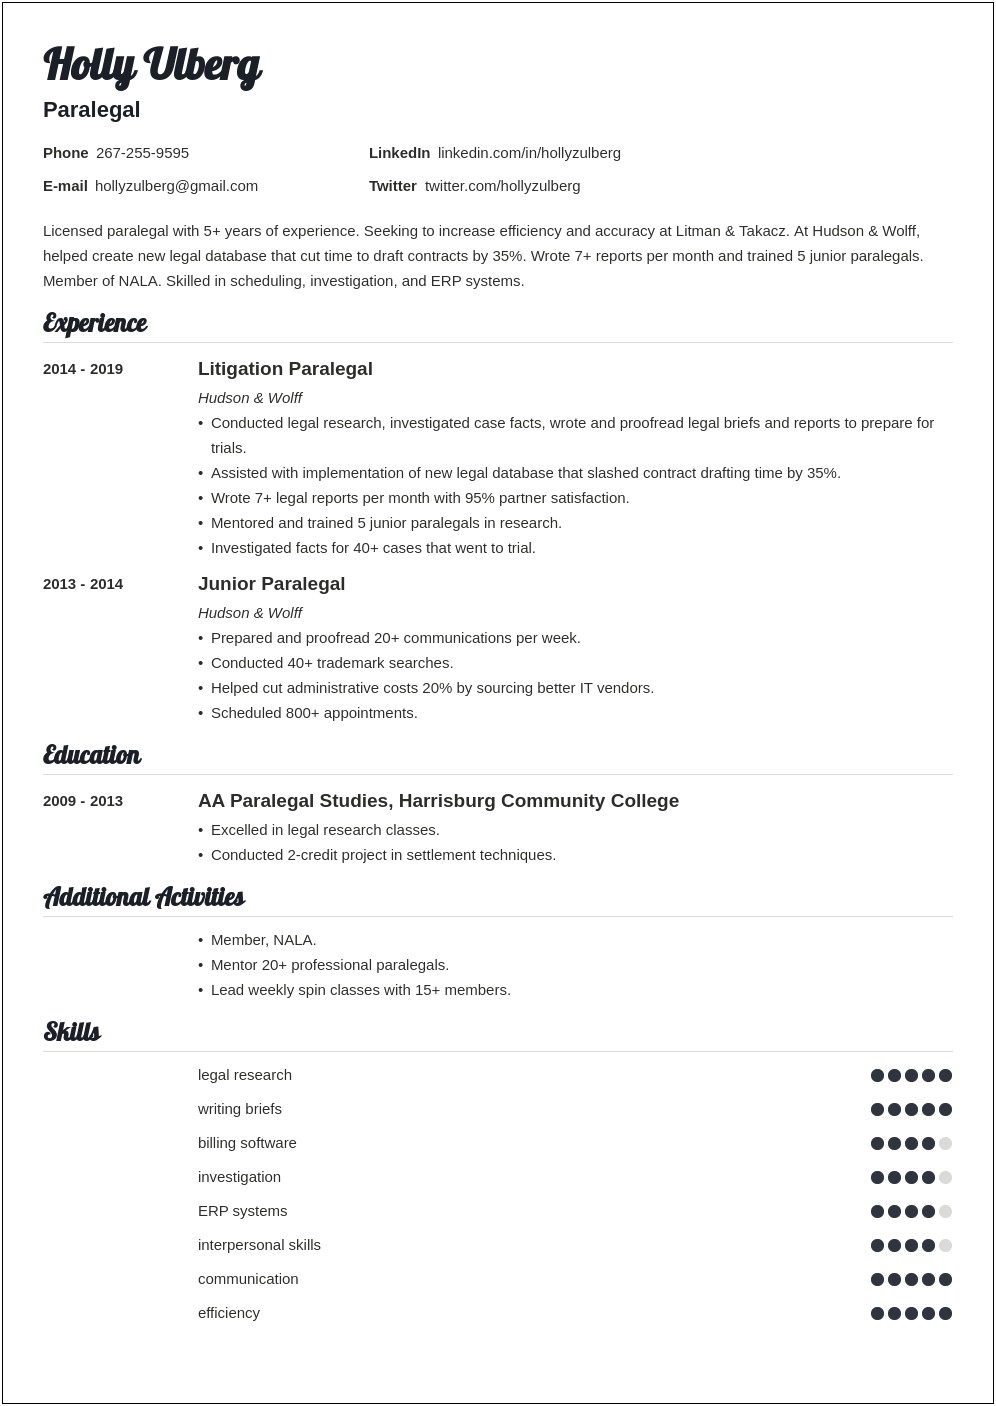 Resume For Non Experiace Immigrant Sample